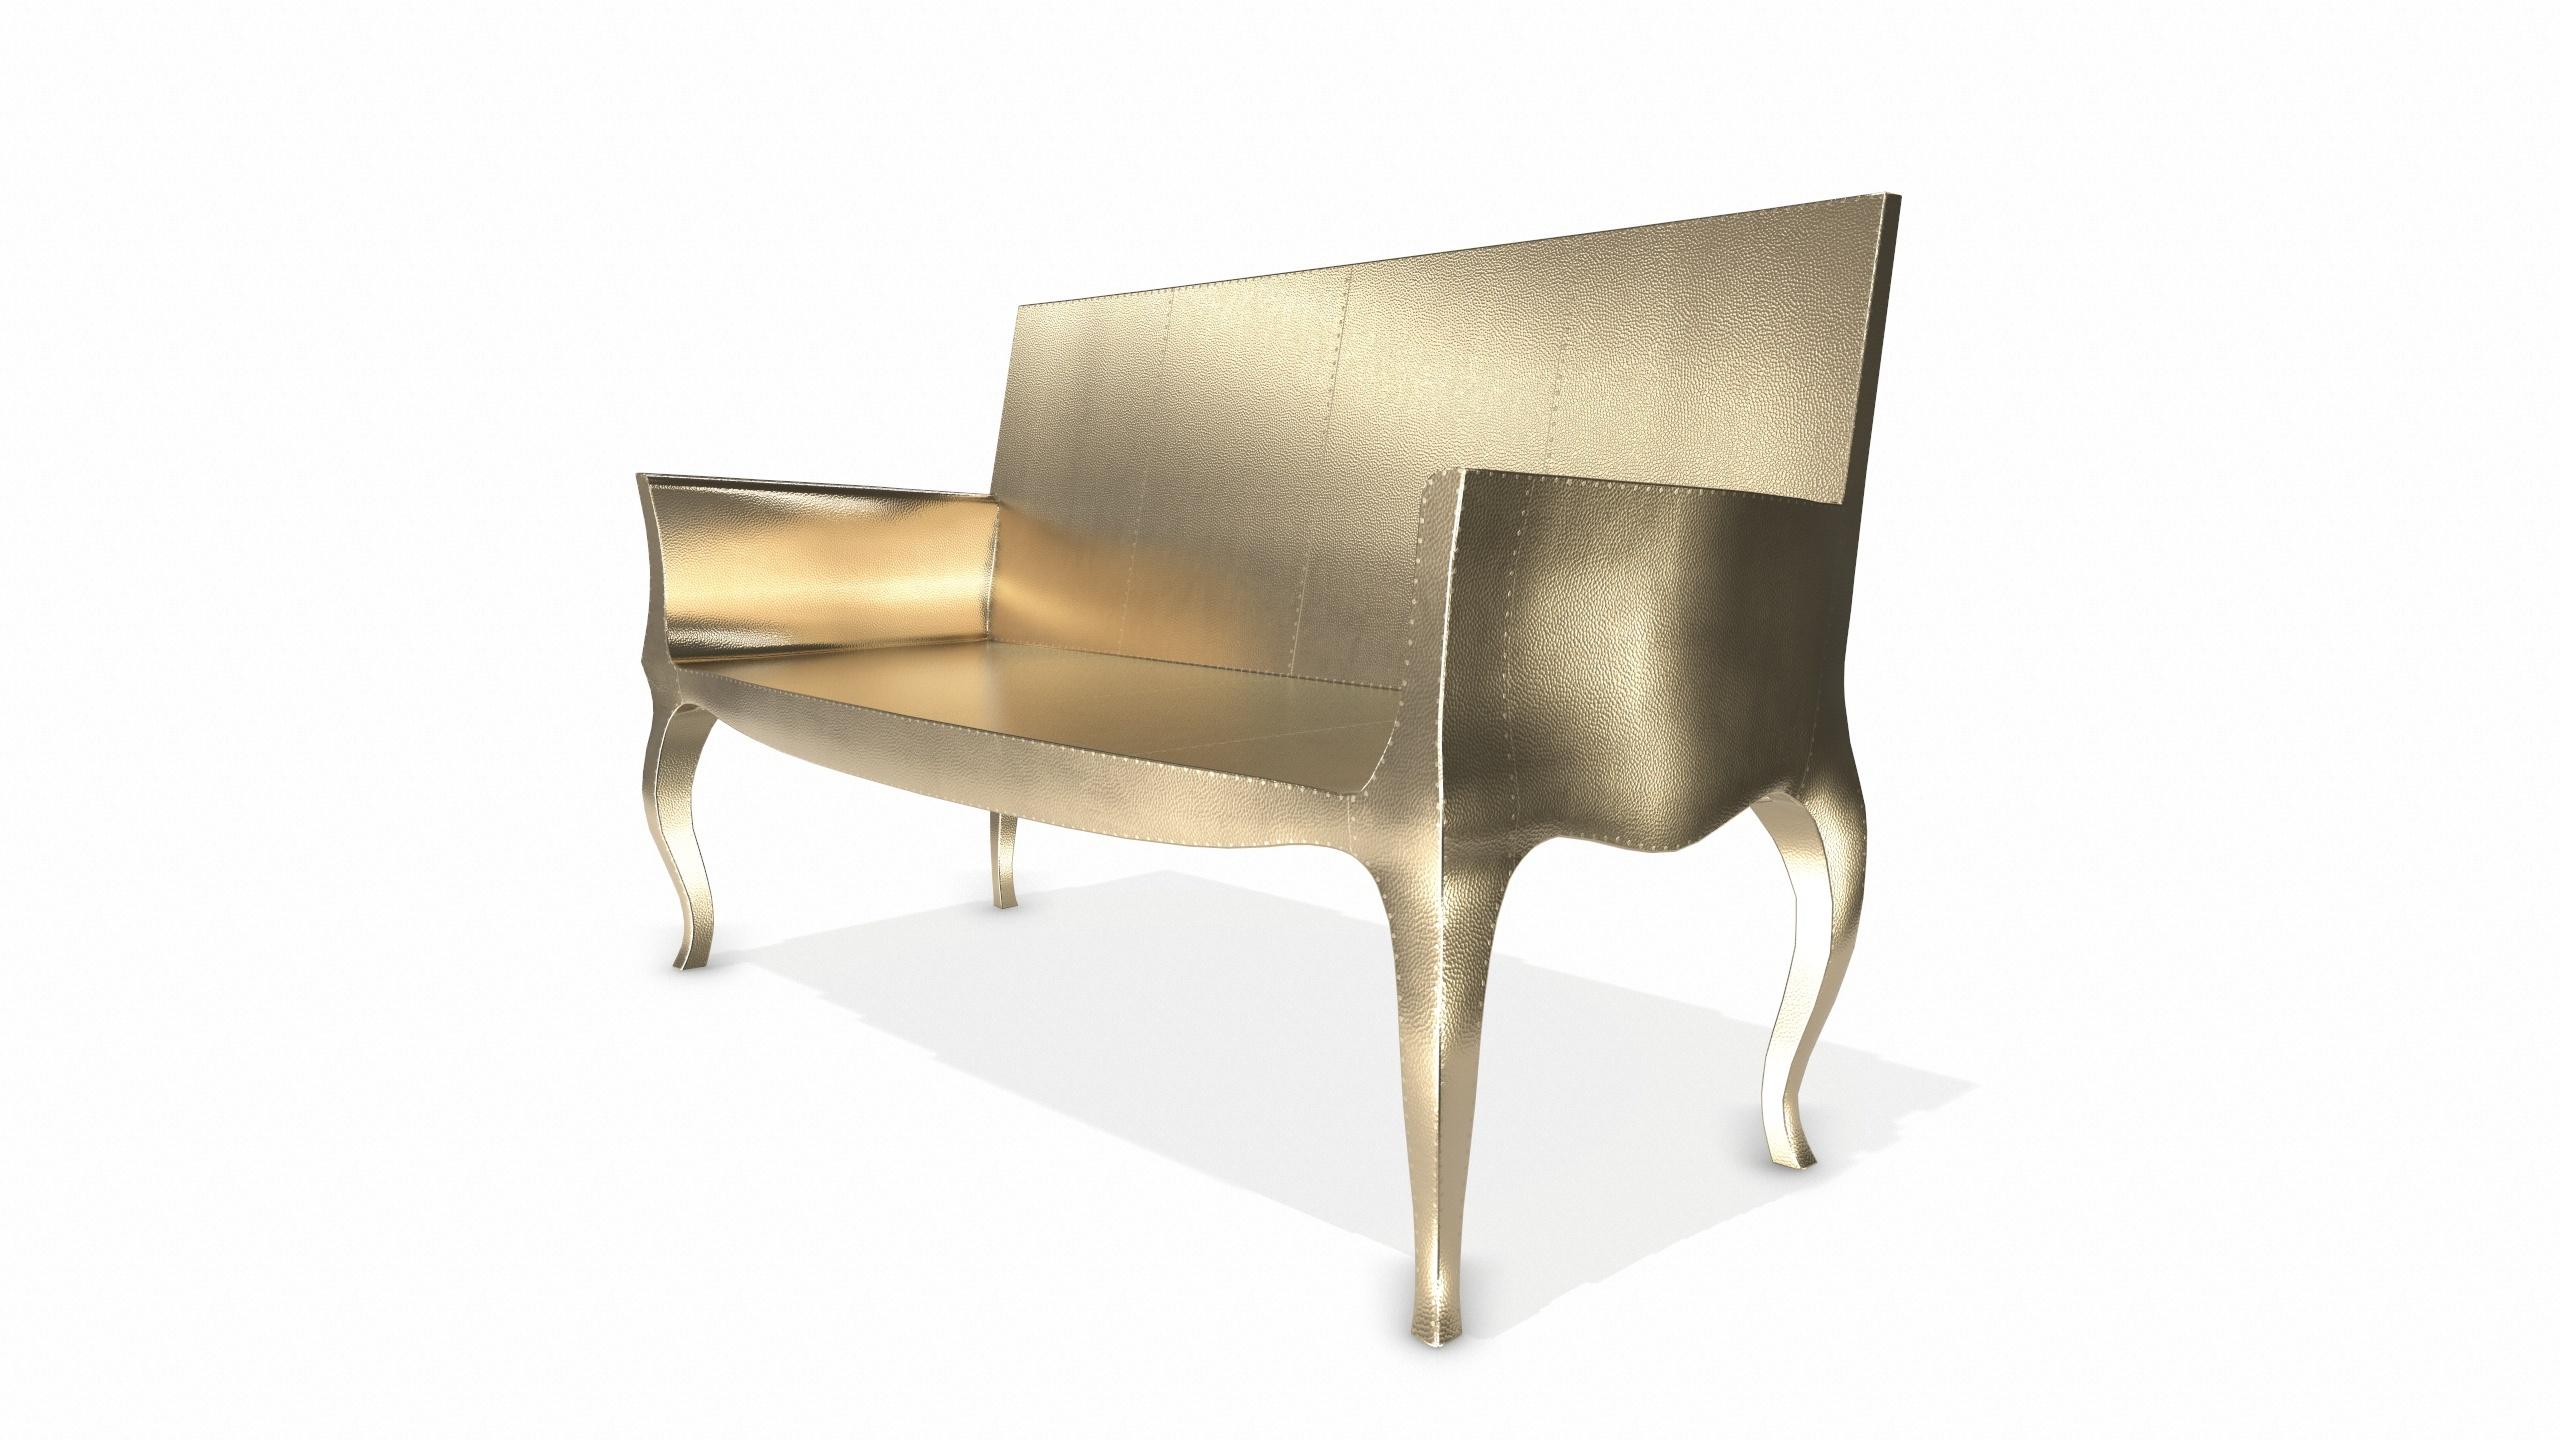 Hand-Crafted Louise Settee Art Deco Loveseats in Mid. Hammered Brass by Paul Mathieu For Sale